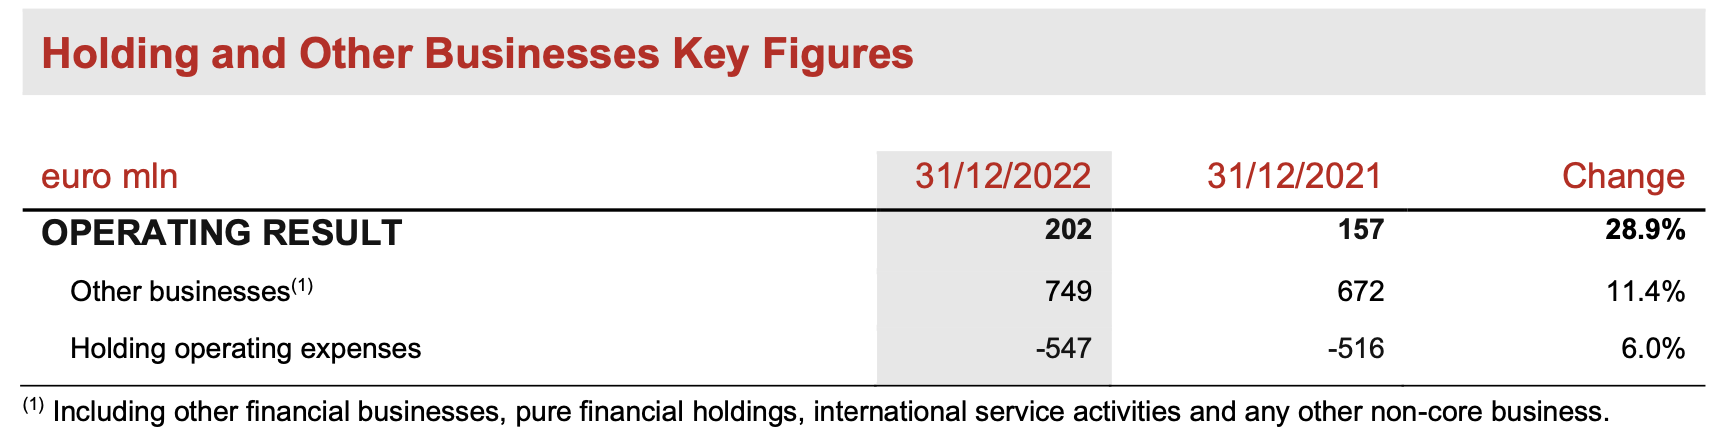 holding-and-other-businesses-key-figures-2022